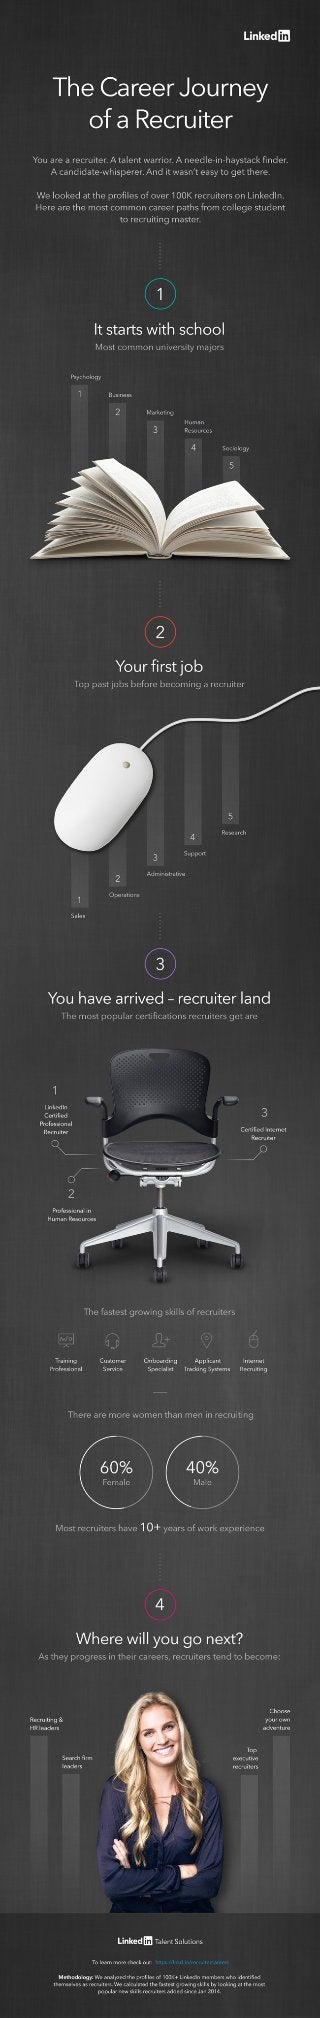 The Career Journey of a Recruiter [INFOGRAPHIC]